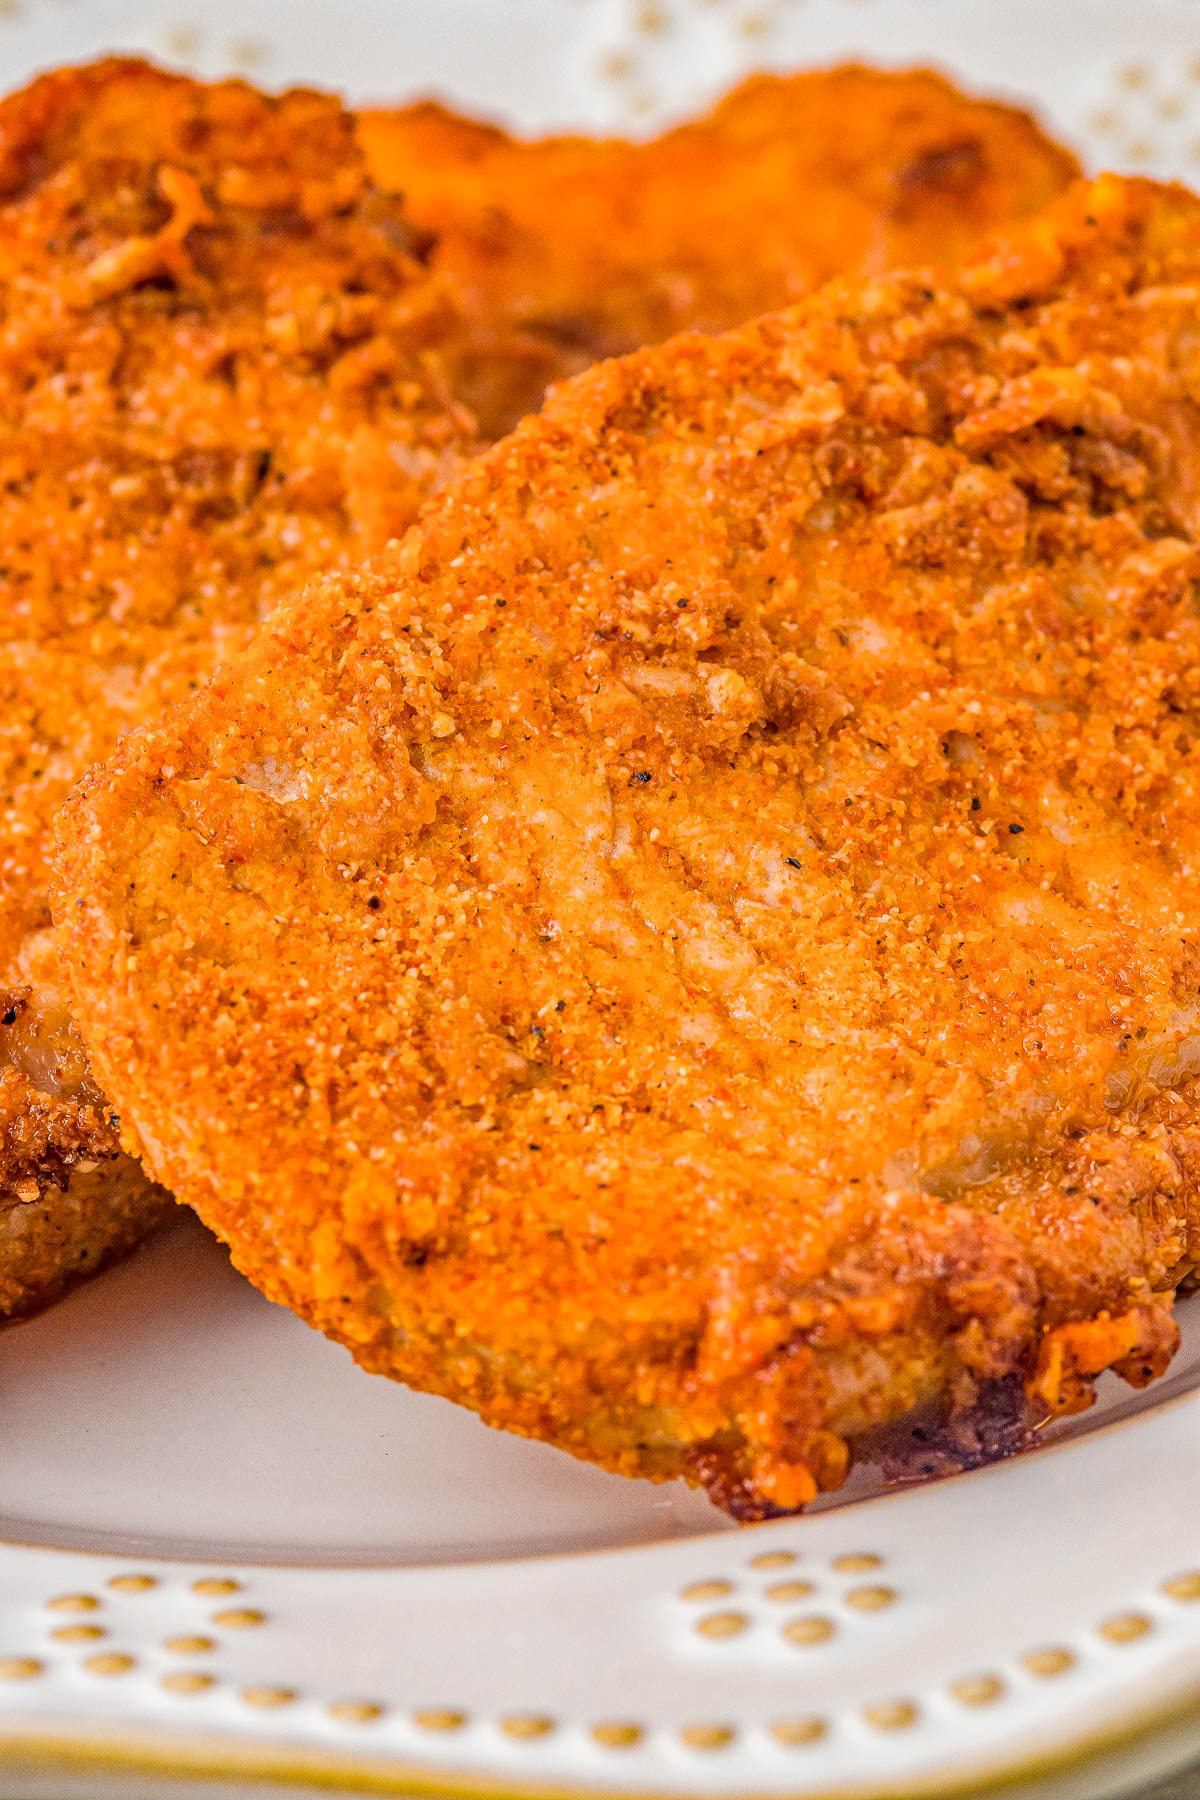 Air Fryer Pork Chops - Coated in Parmesan cheese and a rich spice rub, these air fried pork chops are perfectly crispy on the outside while staying tender and moist on the inside! They're EASY, ready in 15 minutes, perfect for busy weeknights, and a healthier way to enjoy "fried" food. Oven-baking and grilling instructions also provided.